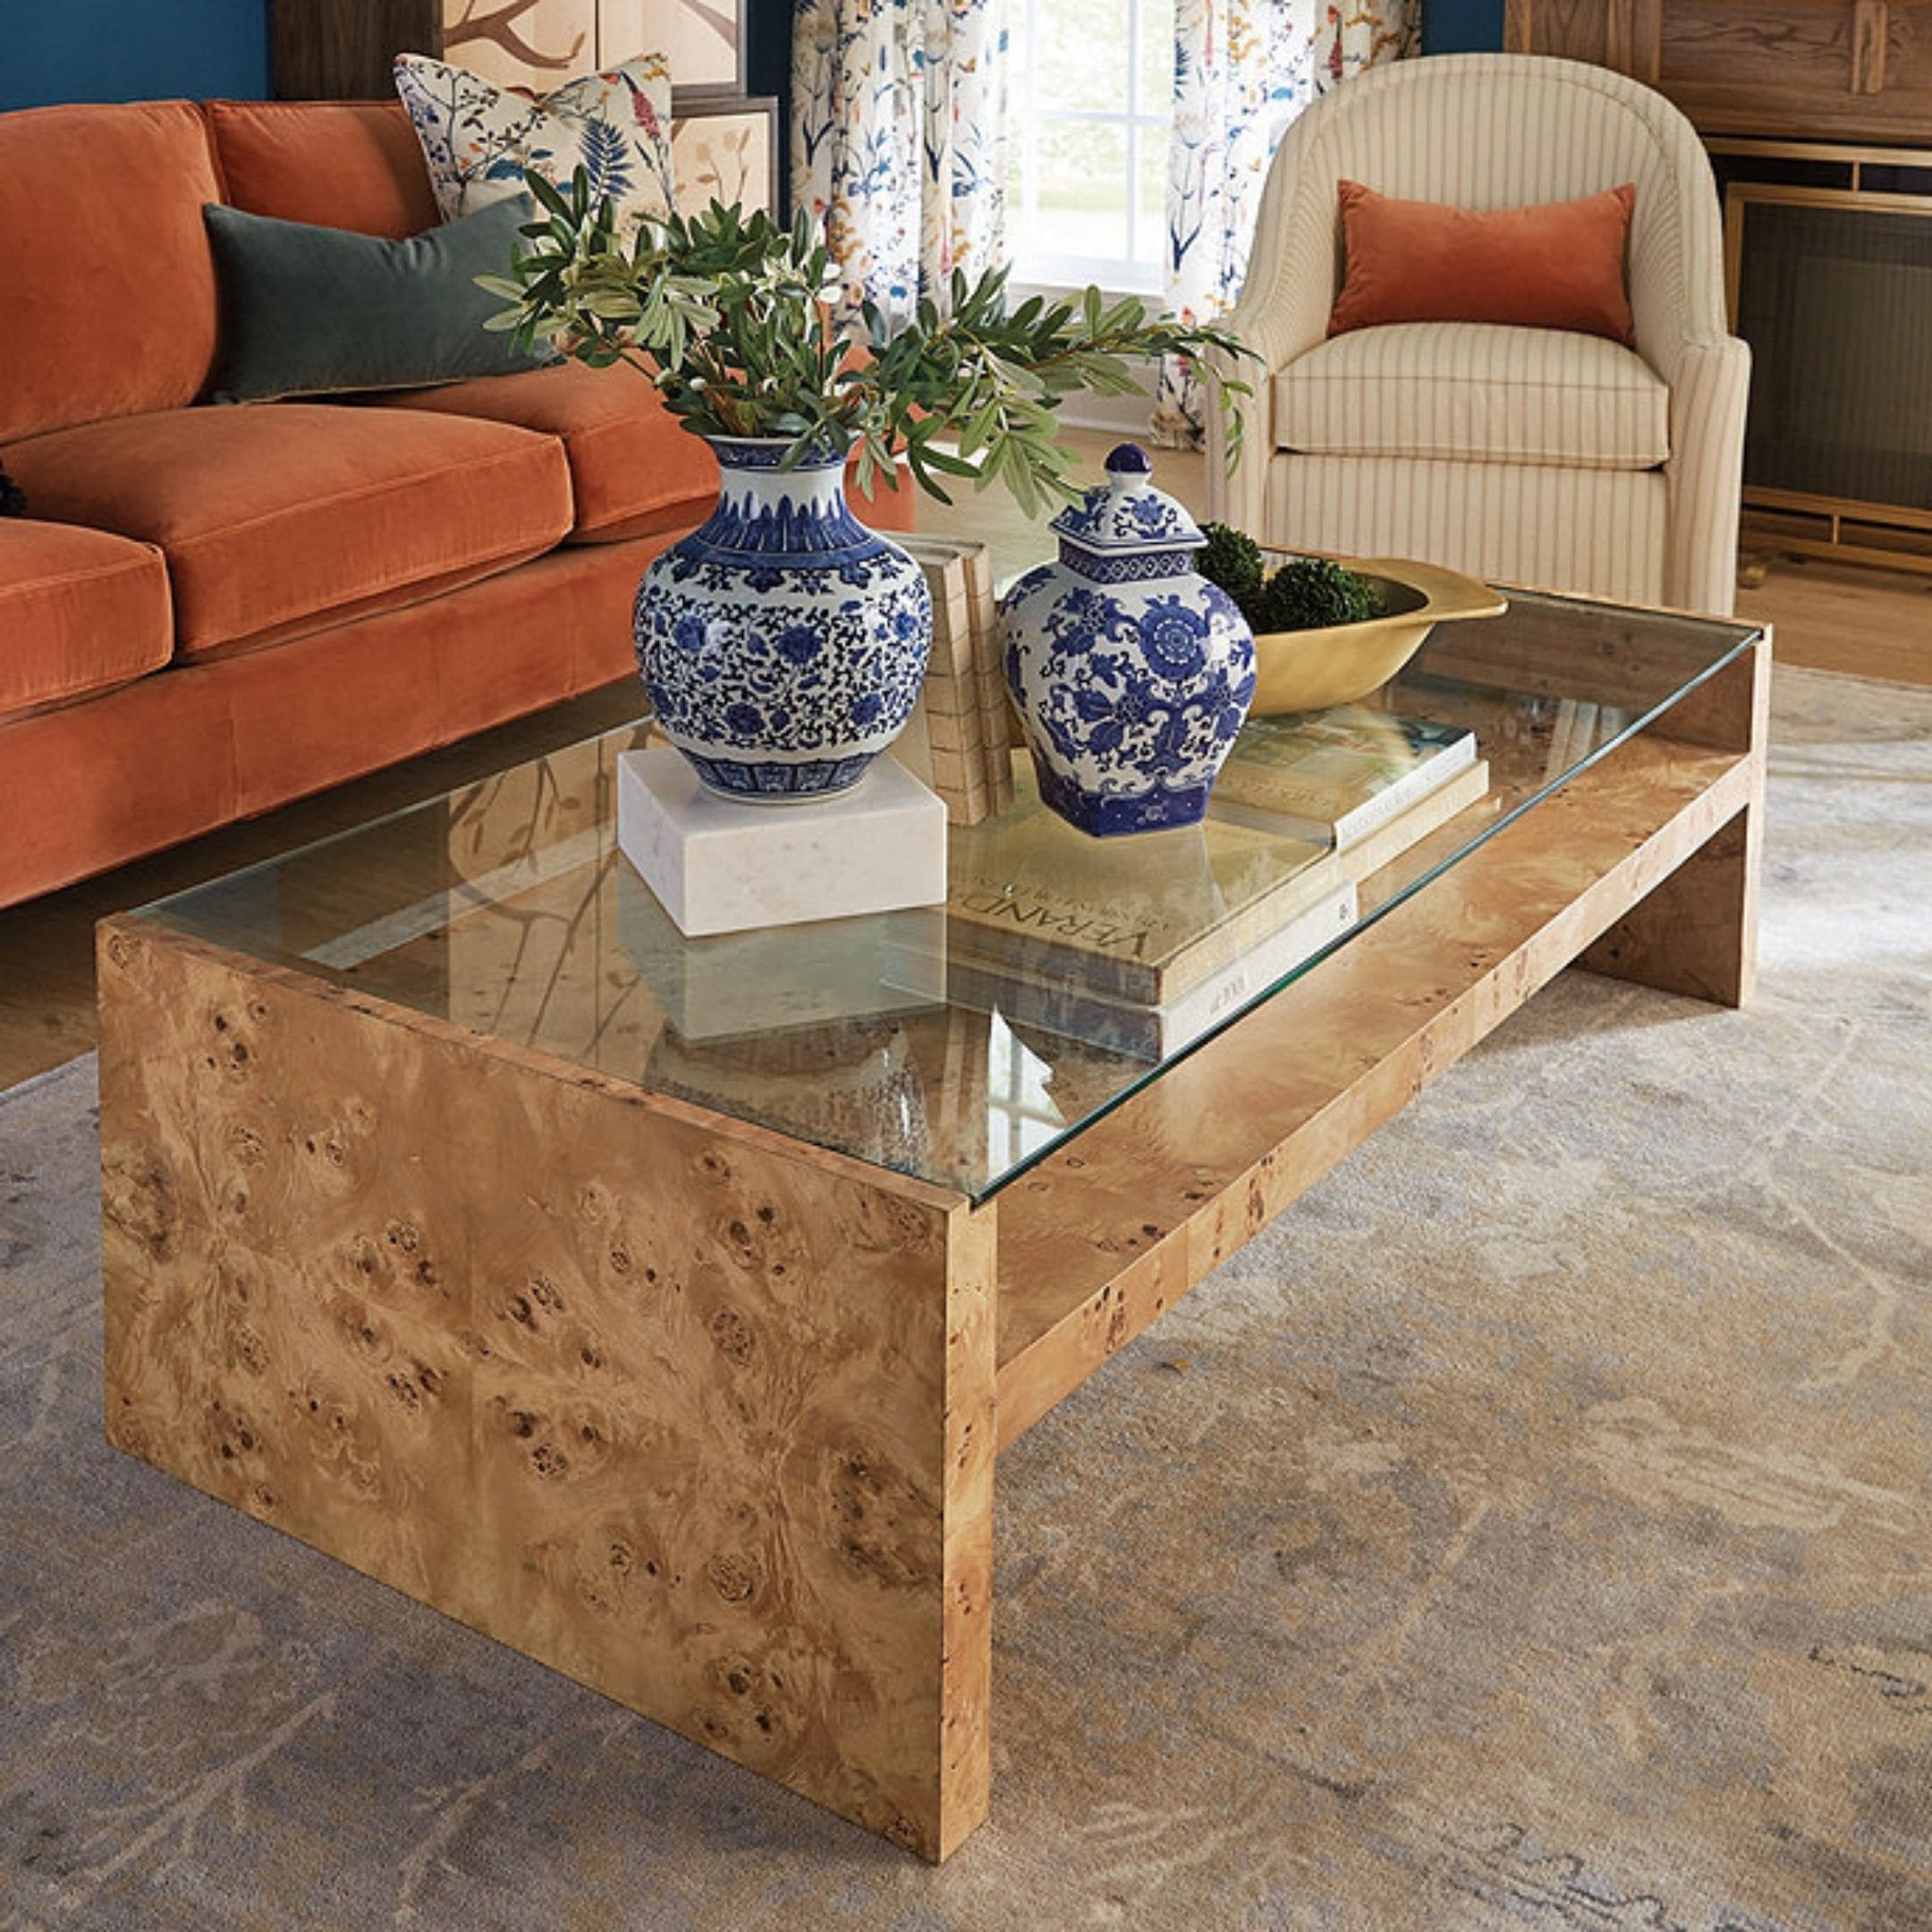 Burl wood coffee table with glass top and small storage.